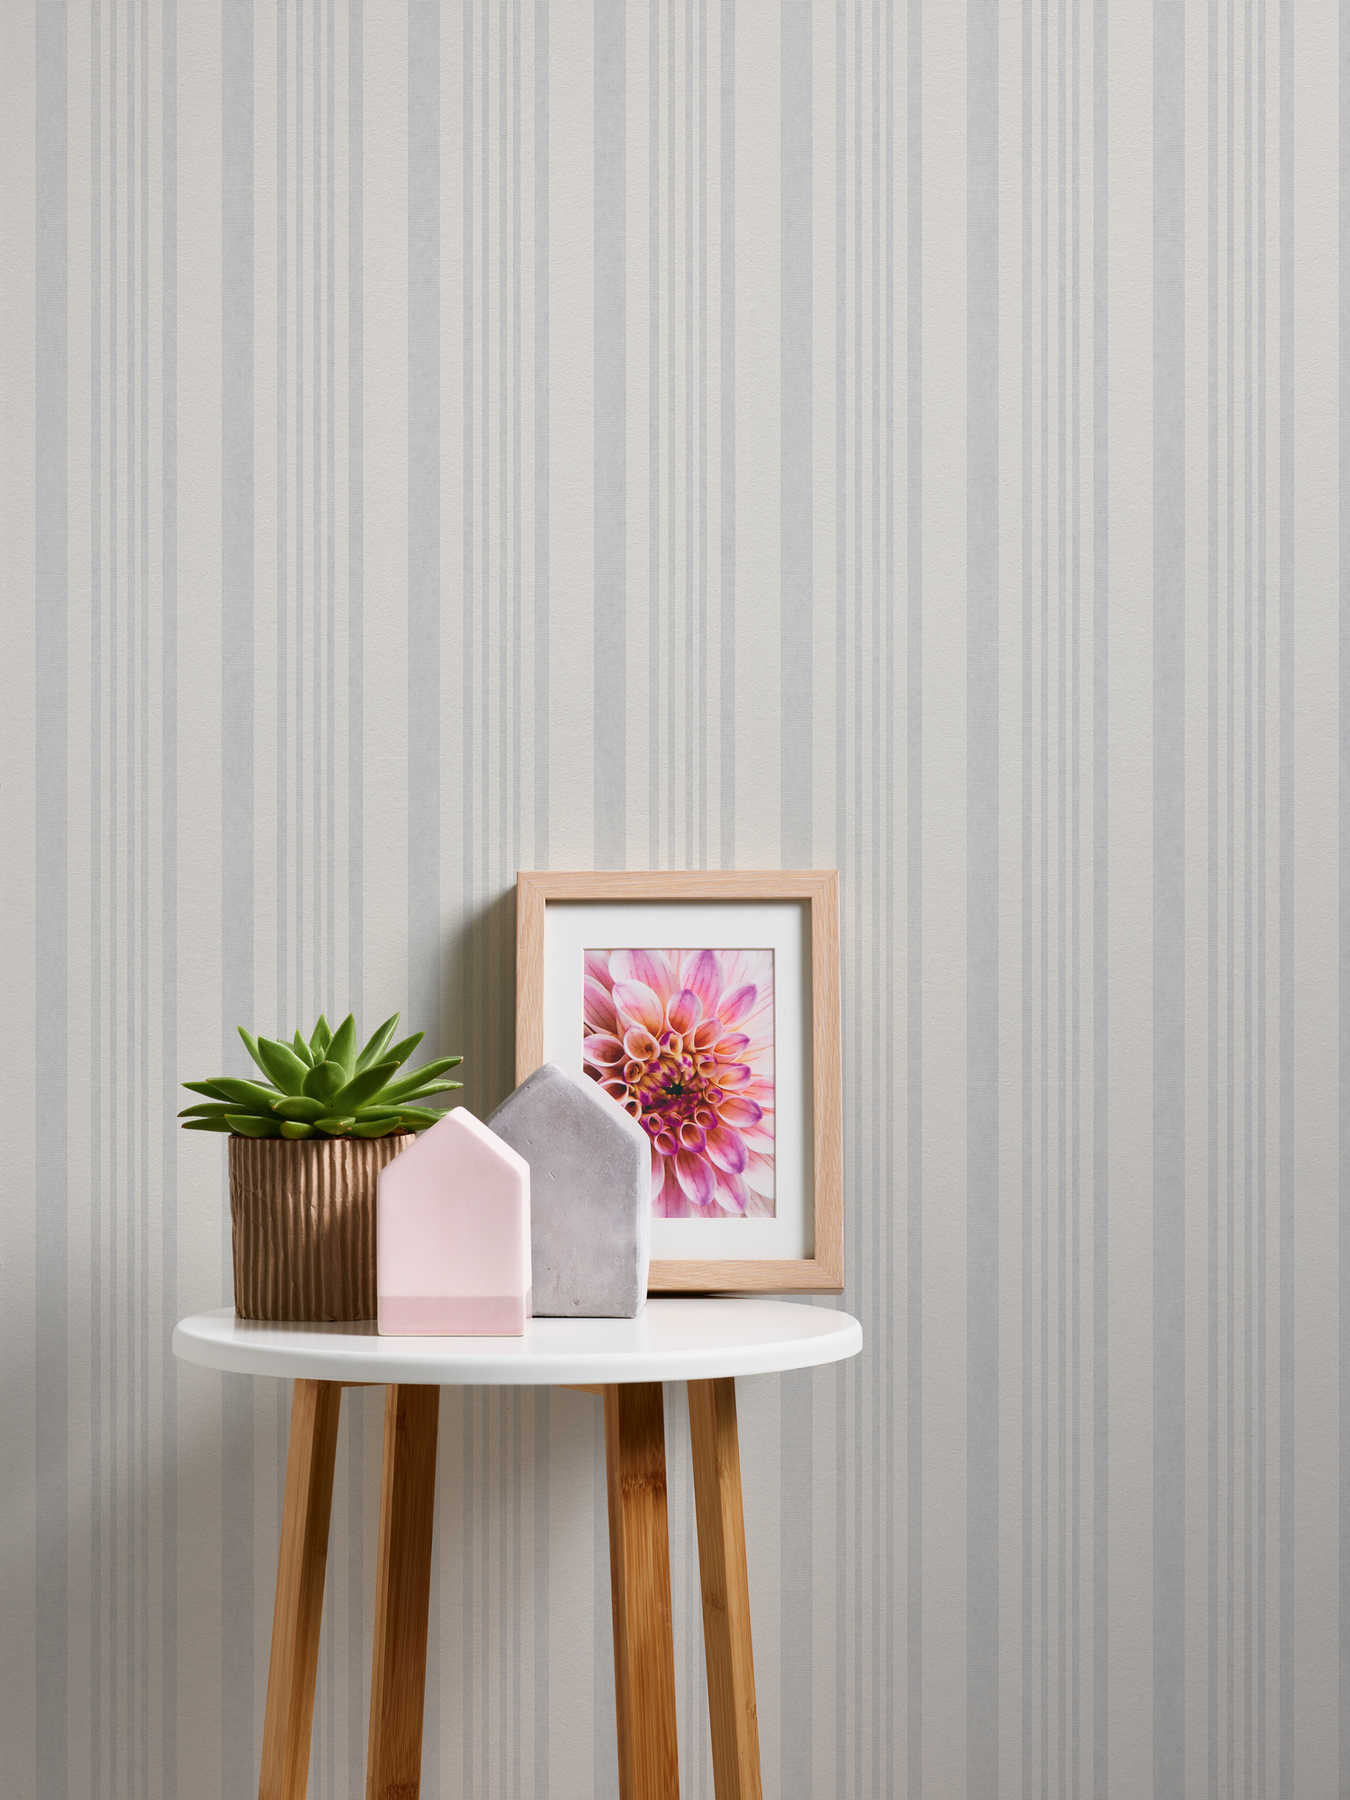             Stripes wallpaper paintable with texture pattern
        